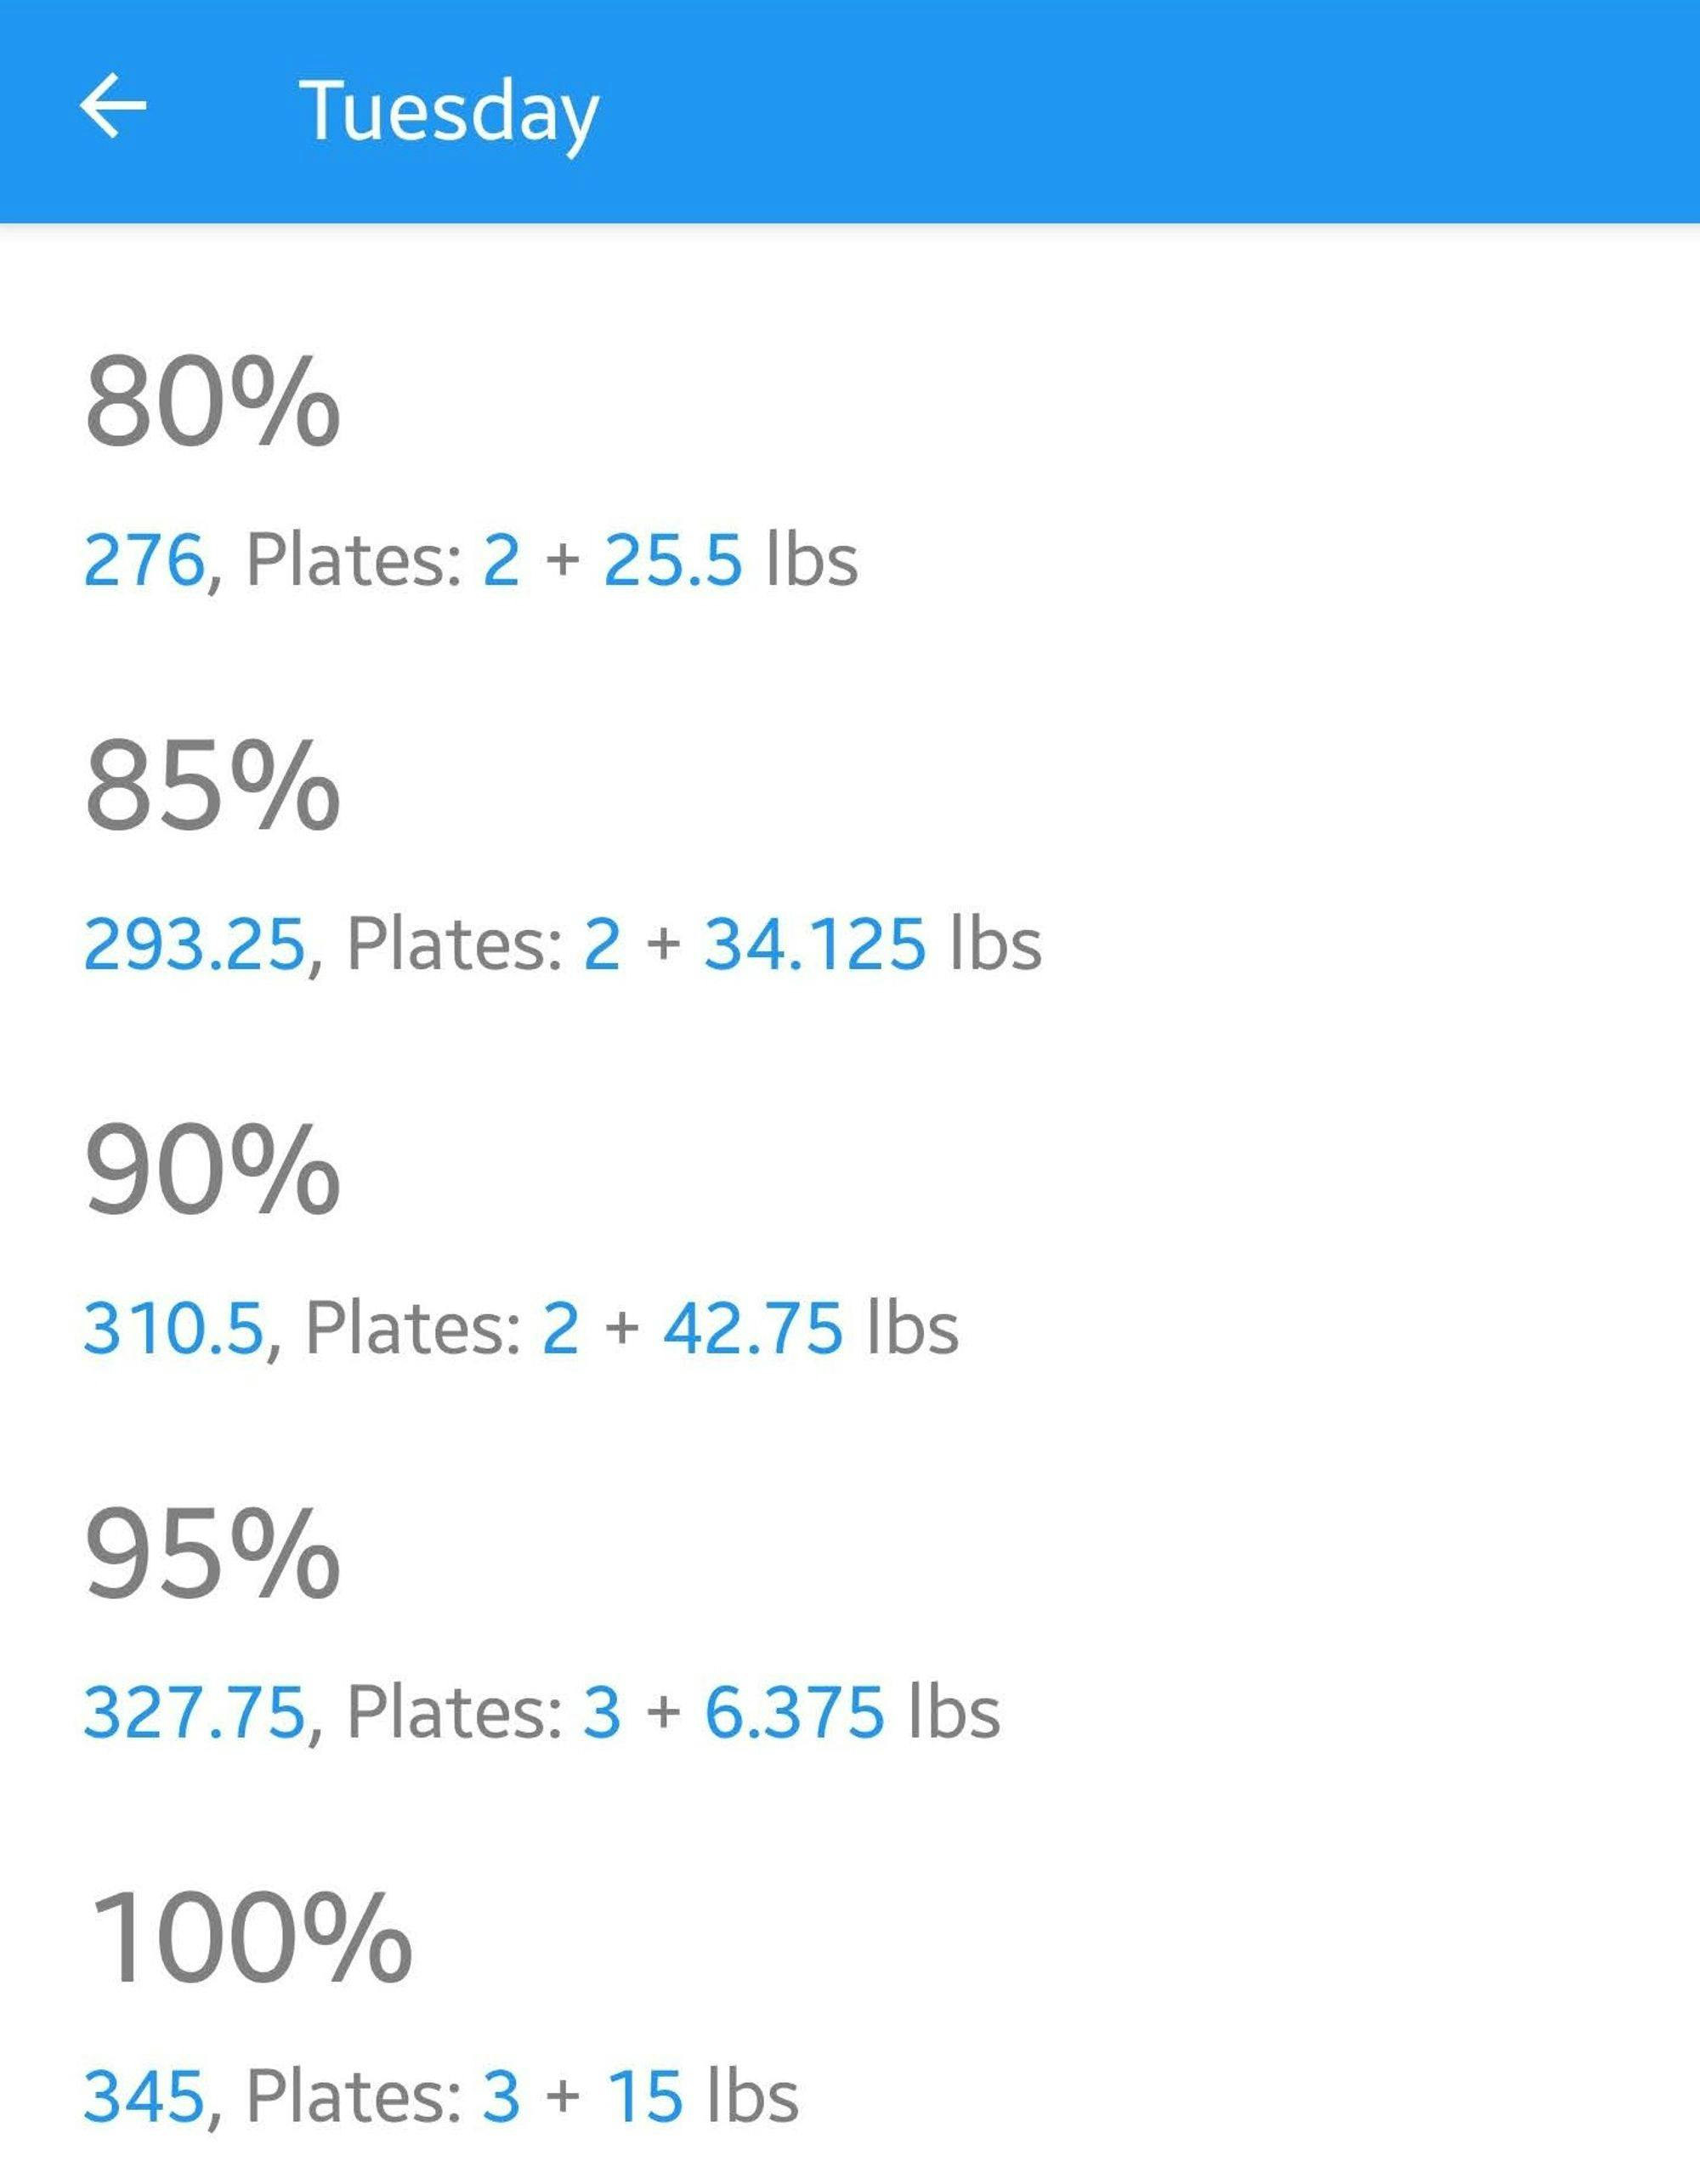 Screenshot of the calculated weight for Tuesday in light mode.